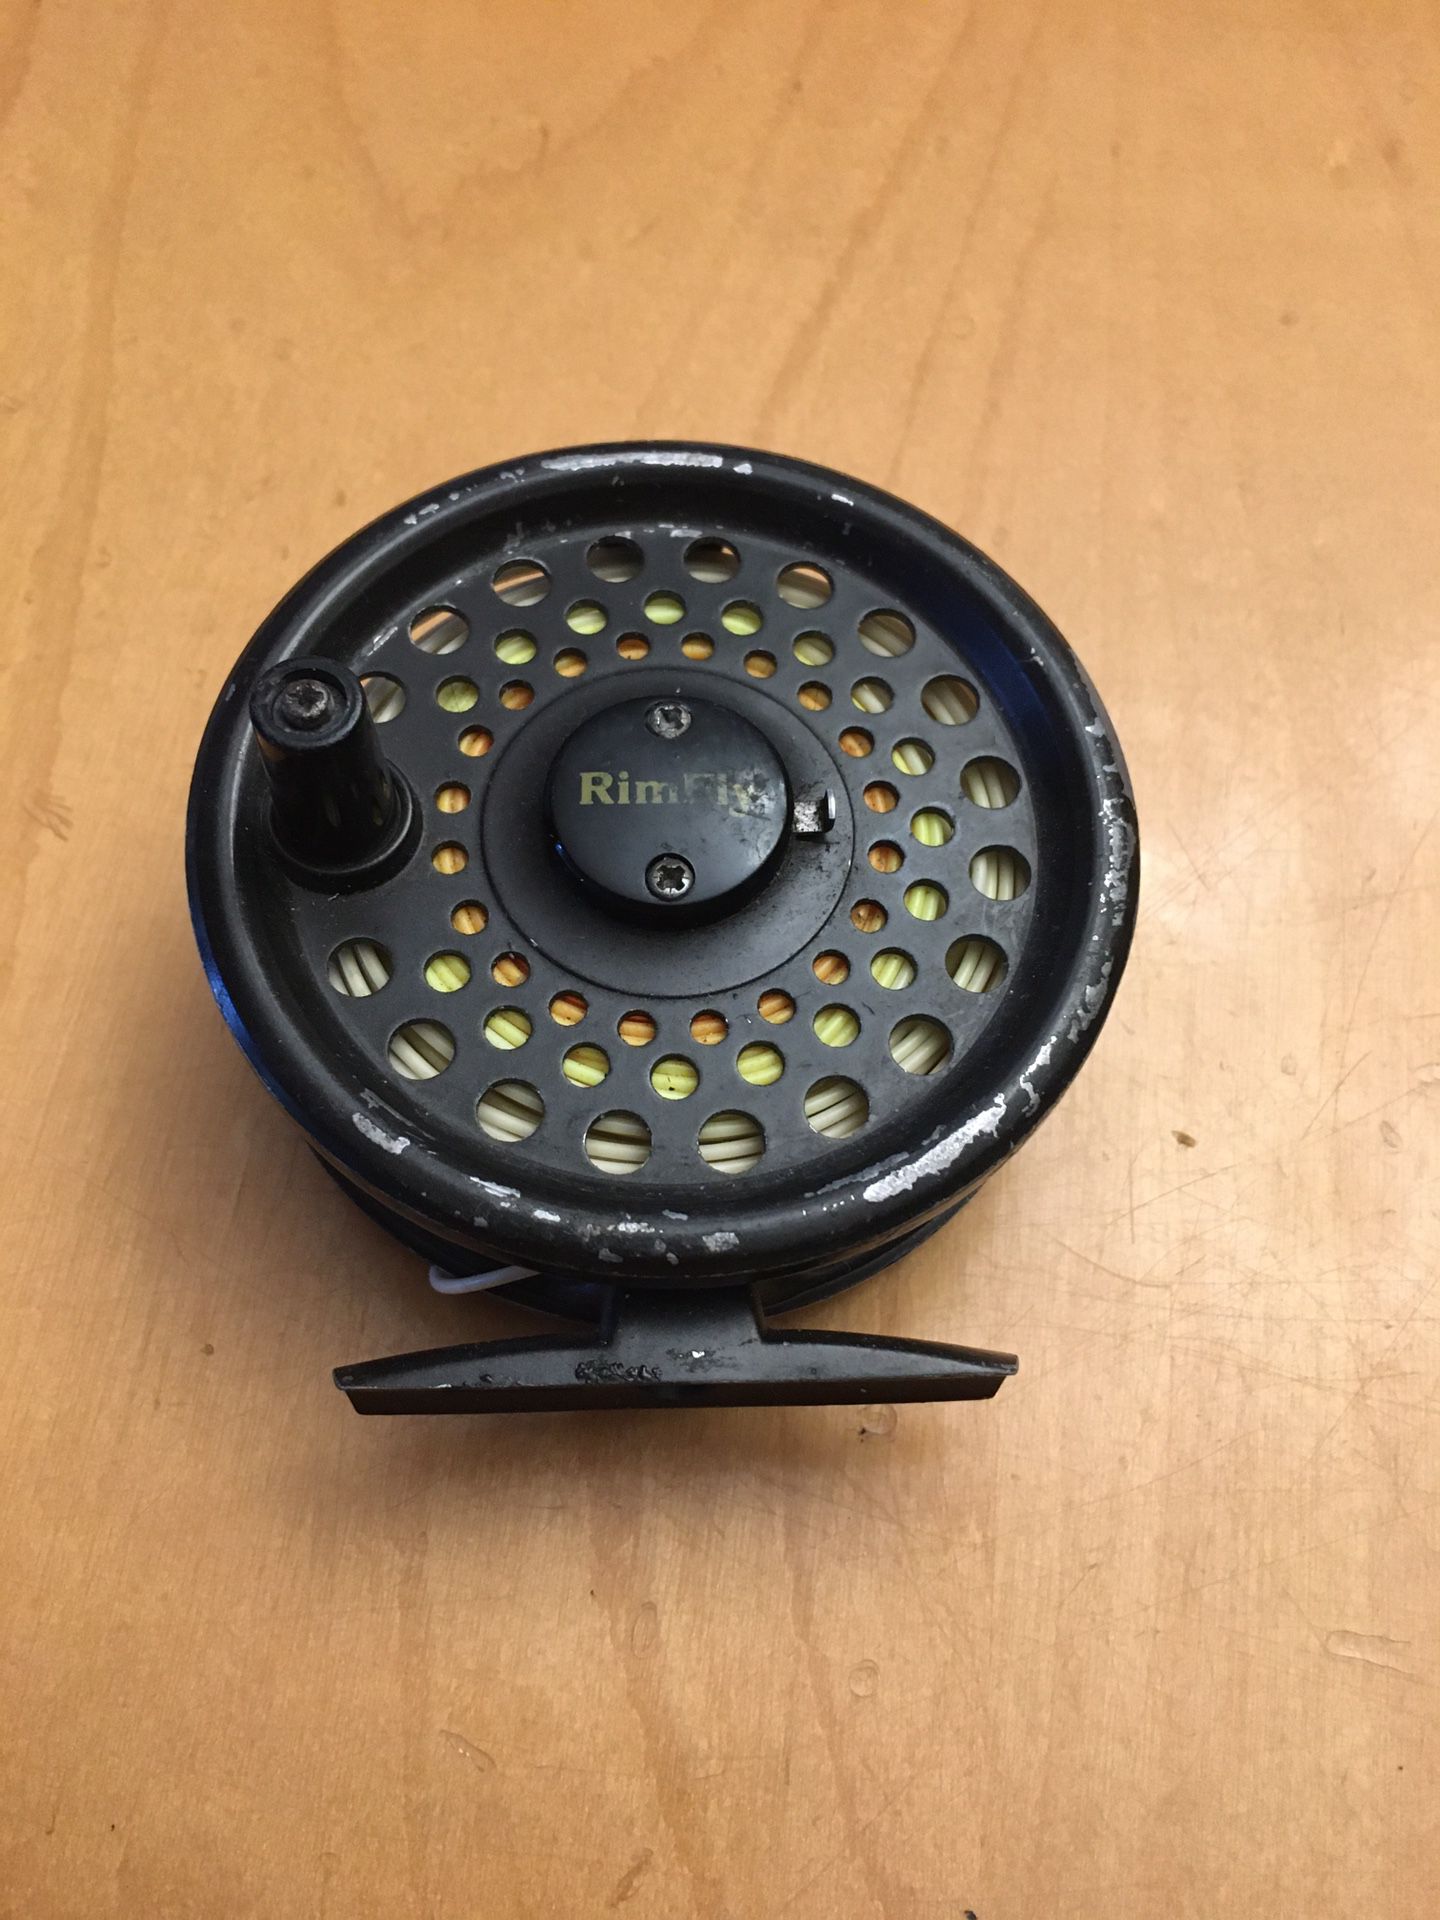 Vintage Cortland Rimfly fly fishing reel Made In England for Sale in  Pembroke Pines, FL - OfferUp